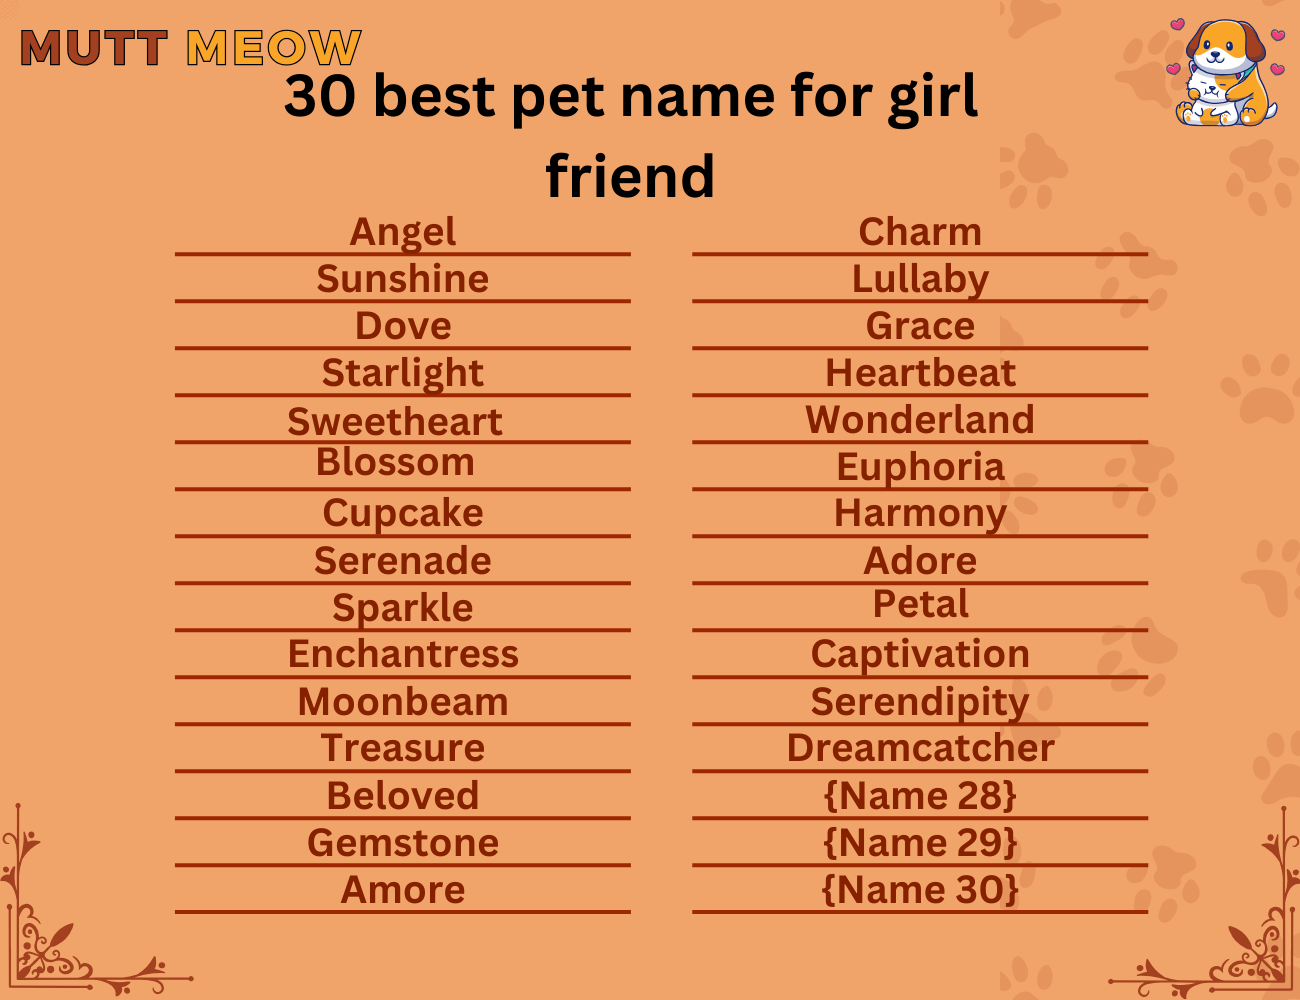 30 best pet name for girl friend